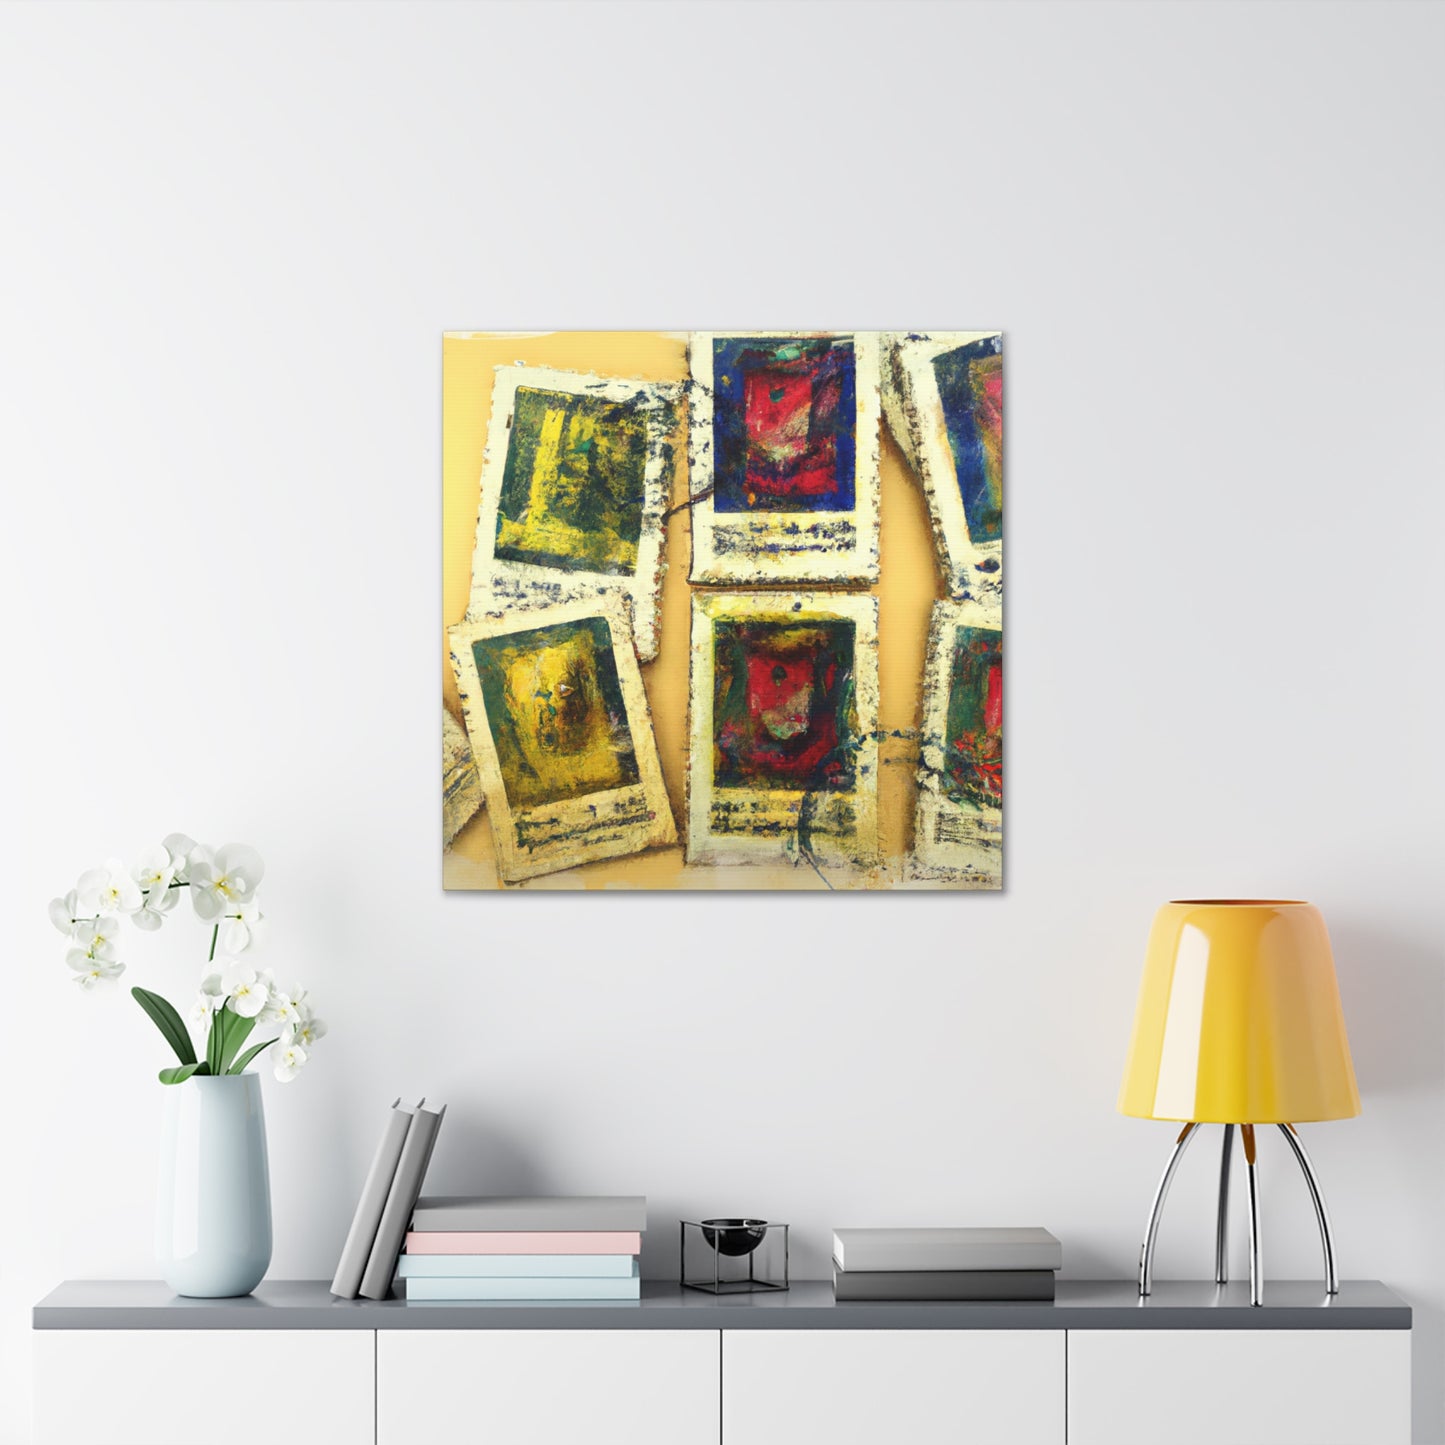 Global Wonders Postage Stamps - Postage Stamp Collector Canvas Wall Art